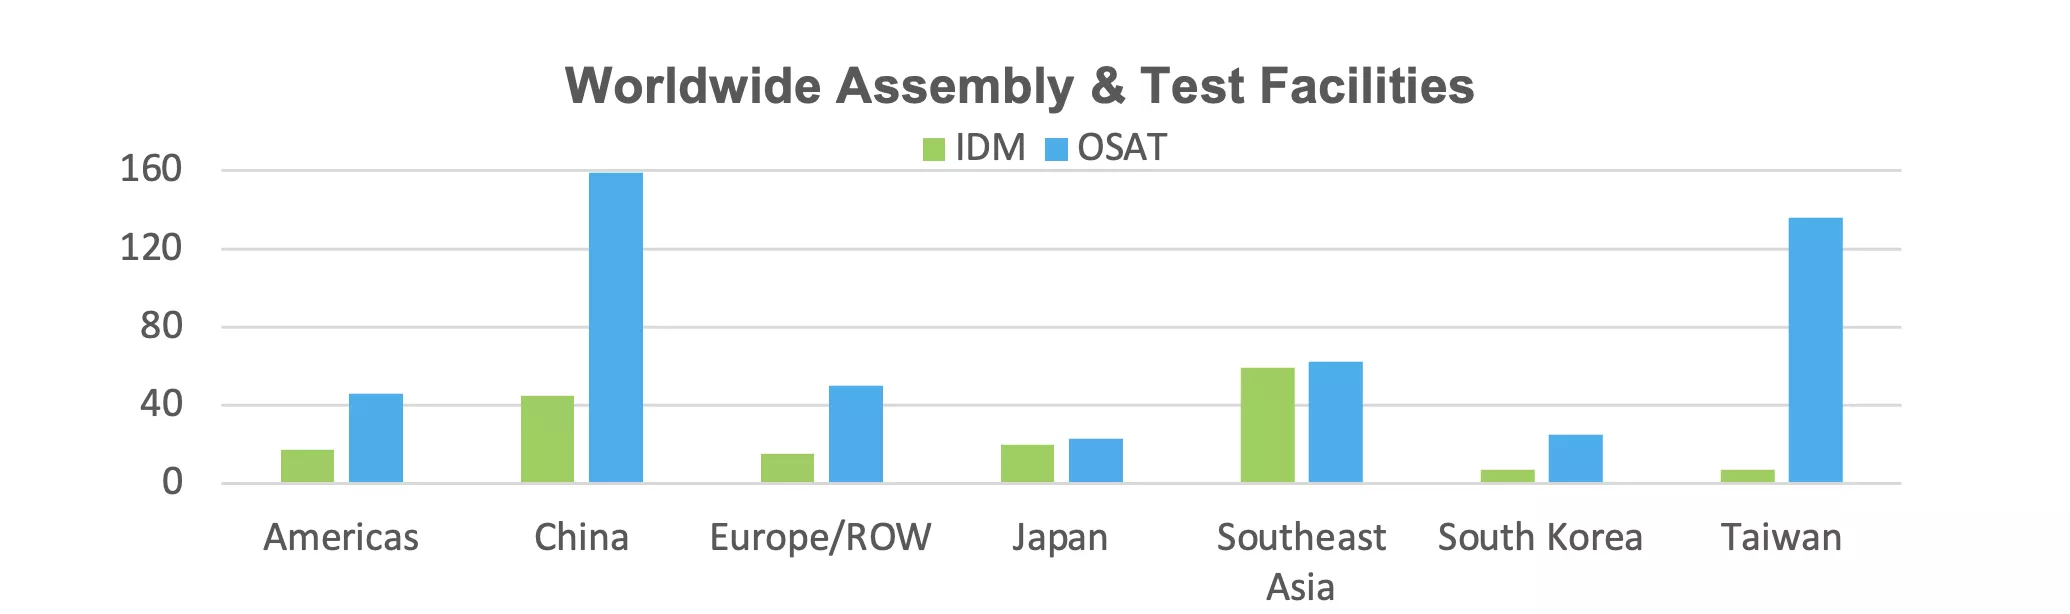 Worldwide Assembly & Test Facilities